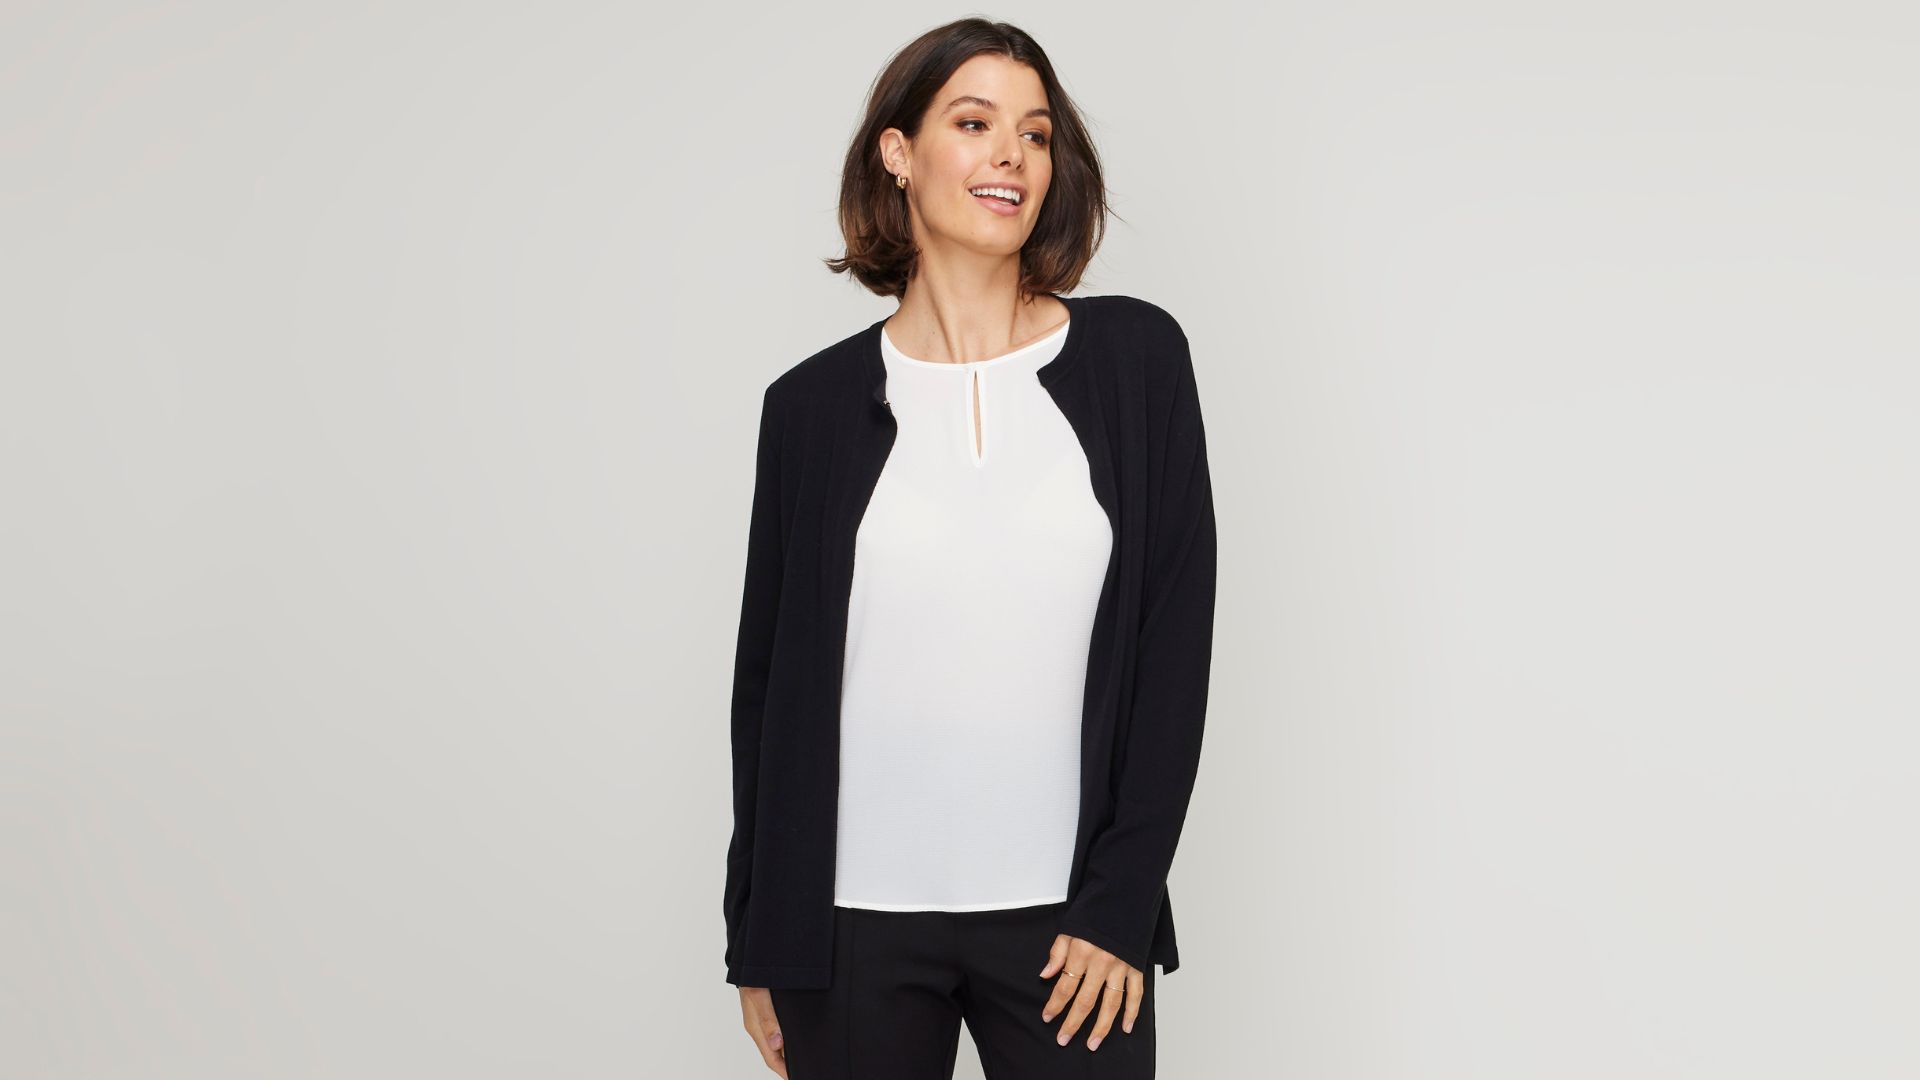 A basic white blouse and black cardigan are staples of a capsule wardrobe